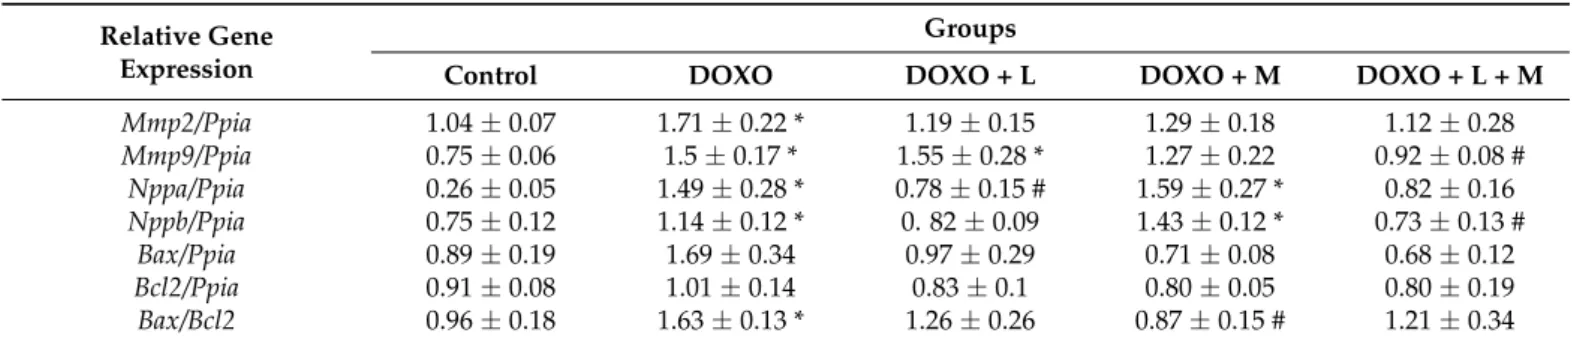 Table 5. The effects of losartan, mirabegron, and their combination on left ventricular expression of matrix metalloprotease-2 and -9, natriuretic peptides A and B, and apoptotic markers at the mRNA level in our DOXO-induced chronic cardiotoxicity model at